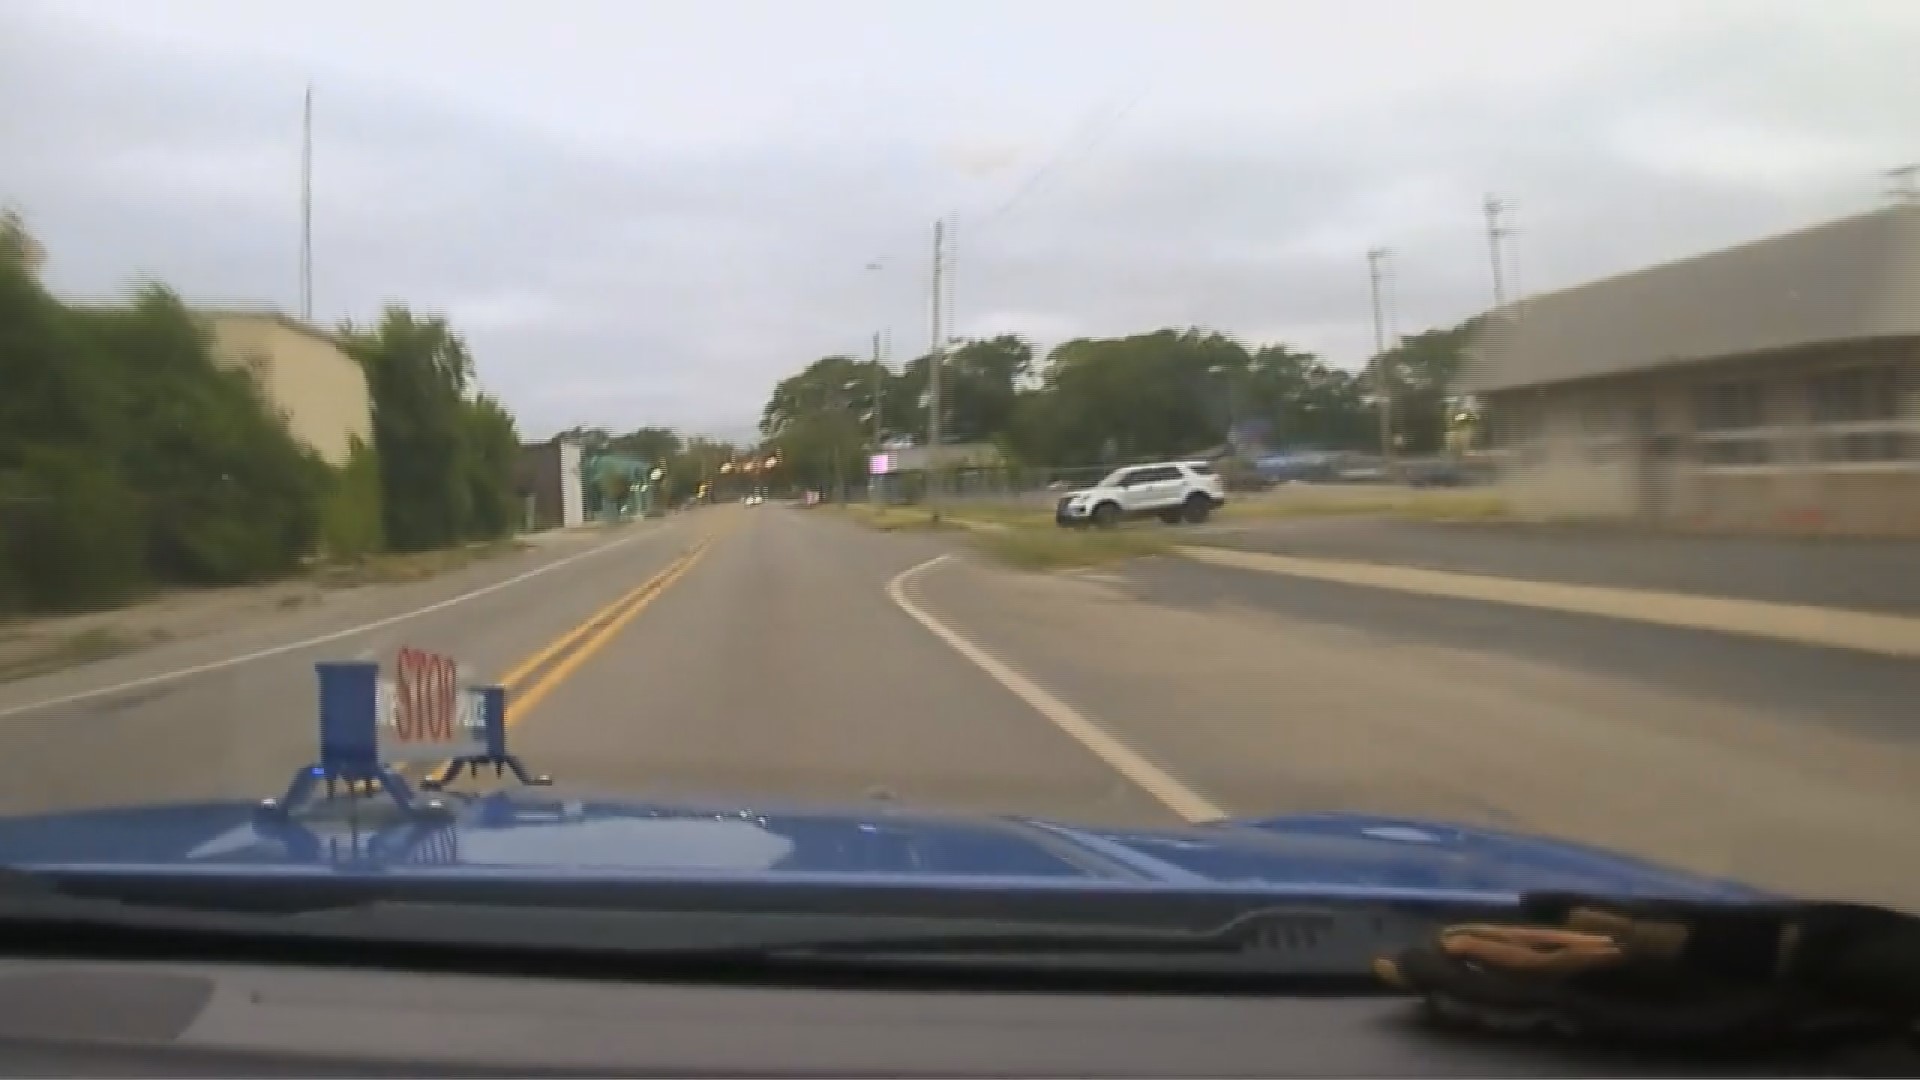 MSP released dash and body cam video of a high speed chase that resulted in a crash with the suspect vehicle in Muskegon on June 15.